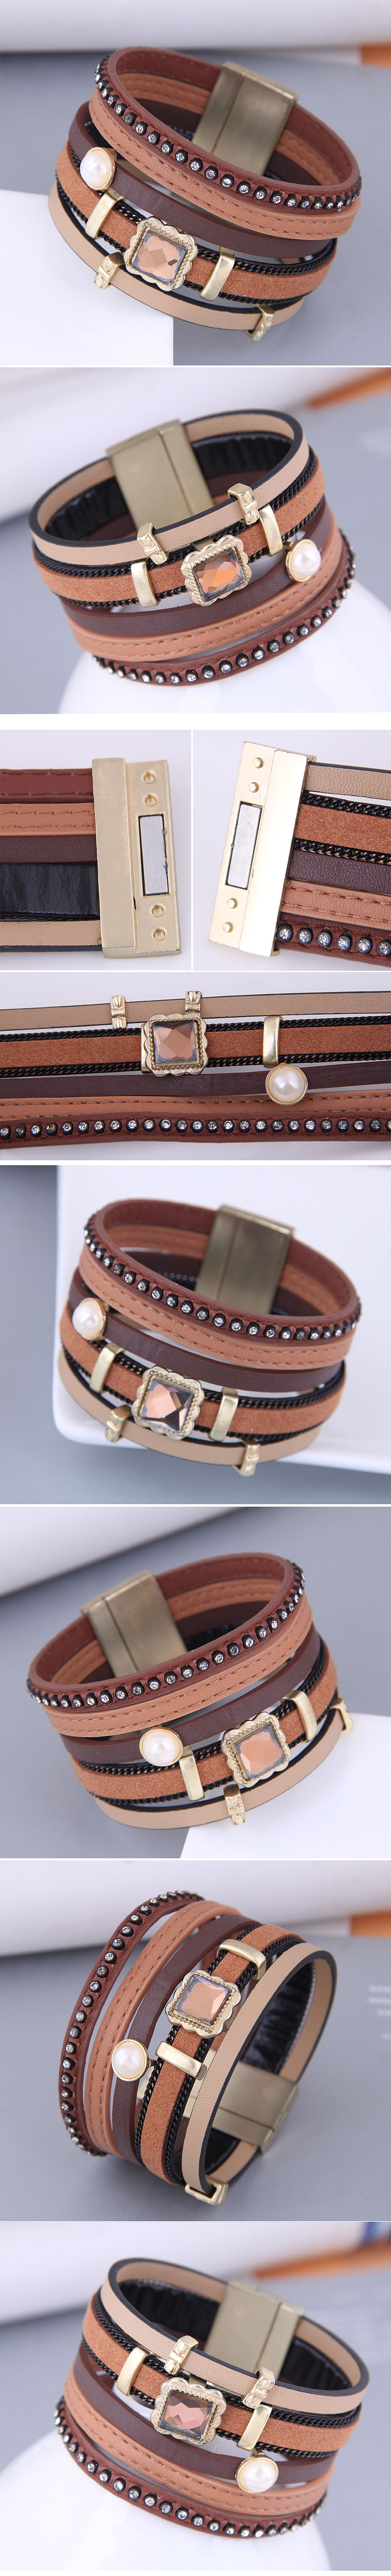 fashion concise accessories leather multilayer wide magnetic buckle braceletpicture1